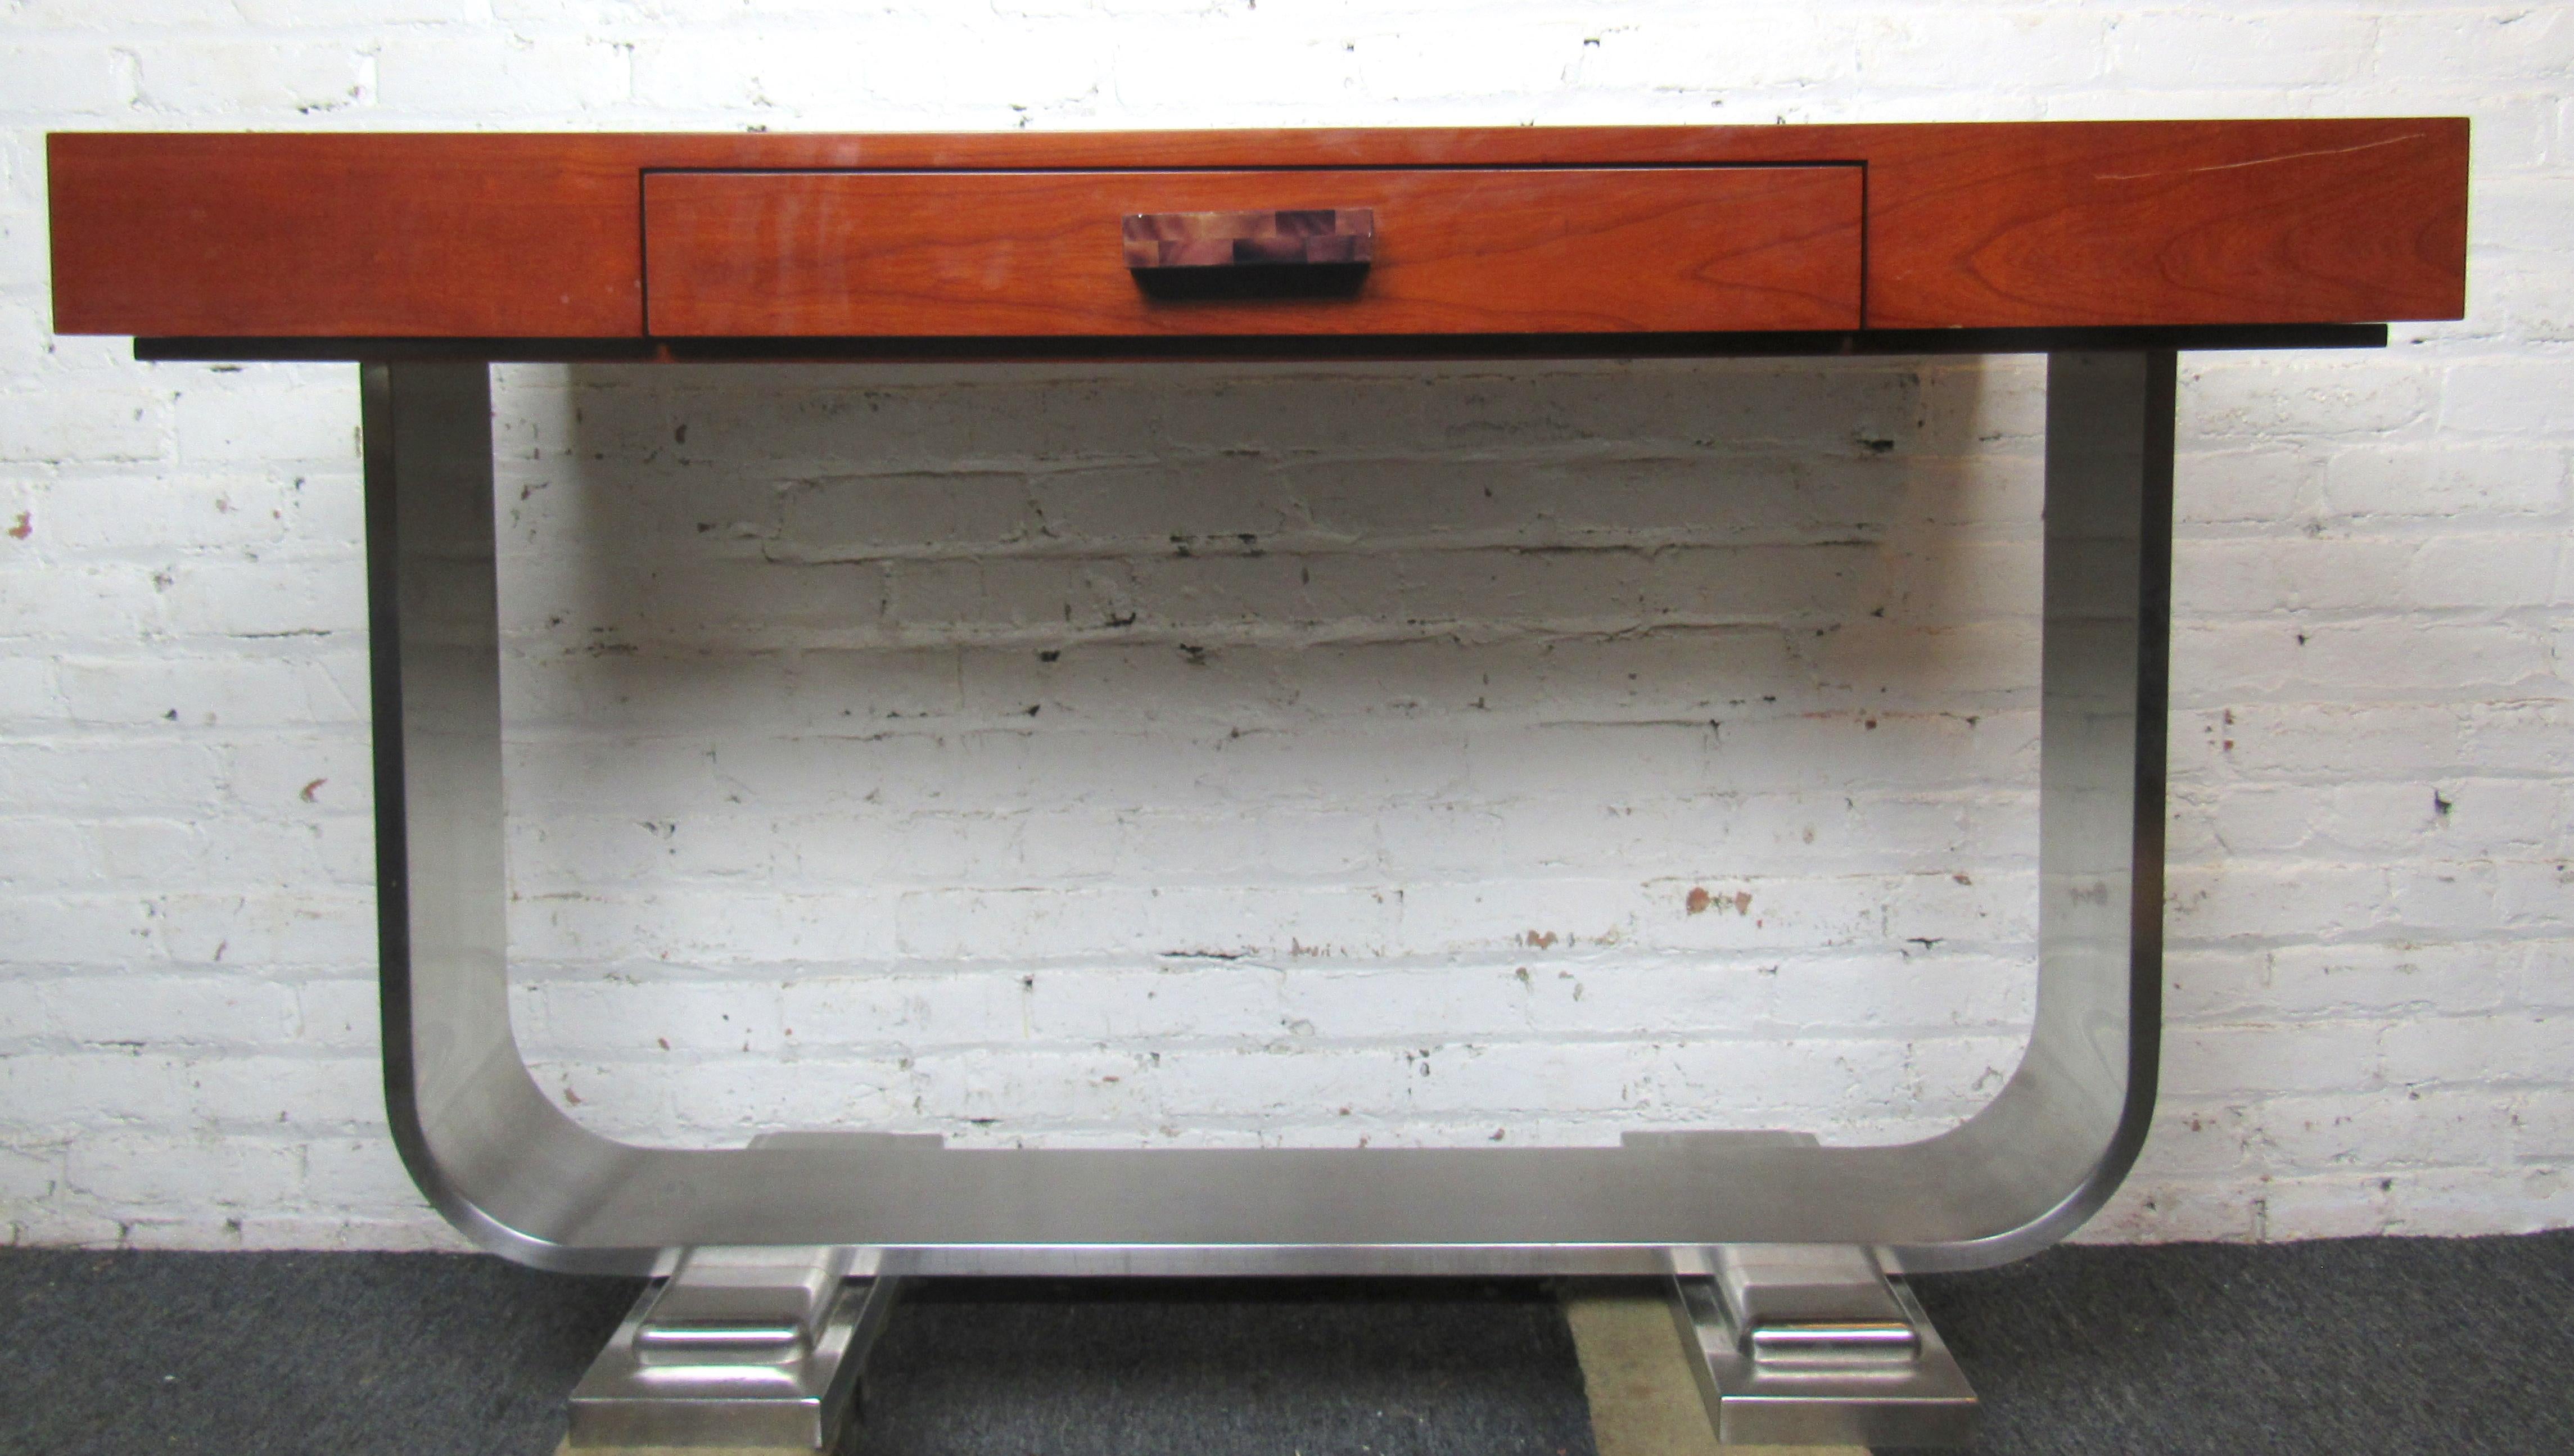 Leather top desk with chrome base. Single drawer with acrylic pull and finished back.
Location: Brooklyn NY.